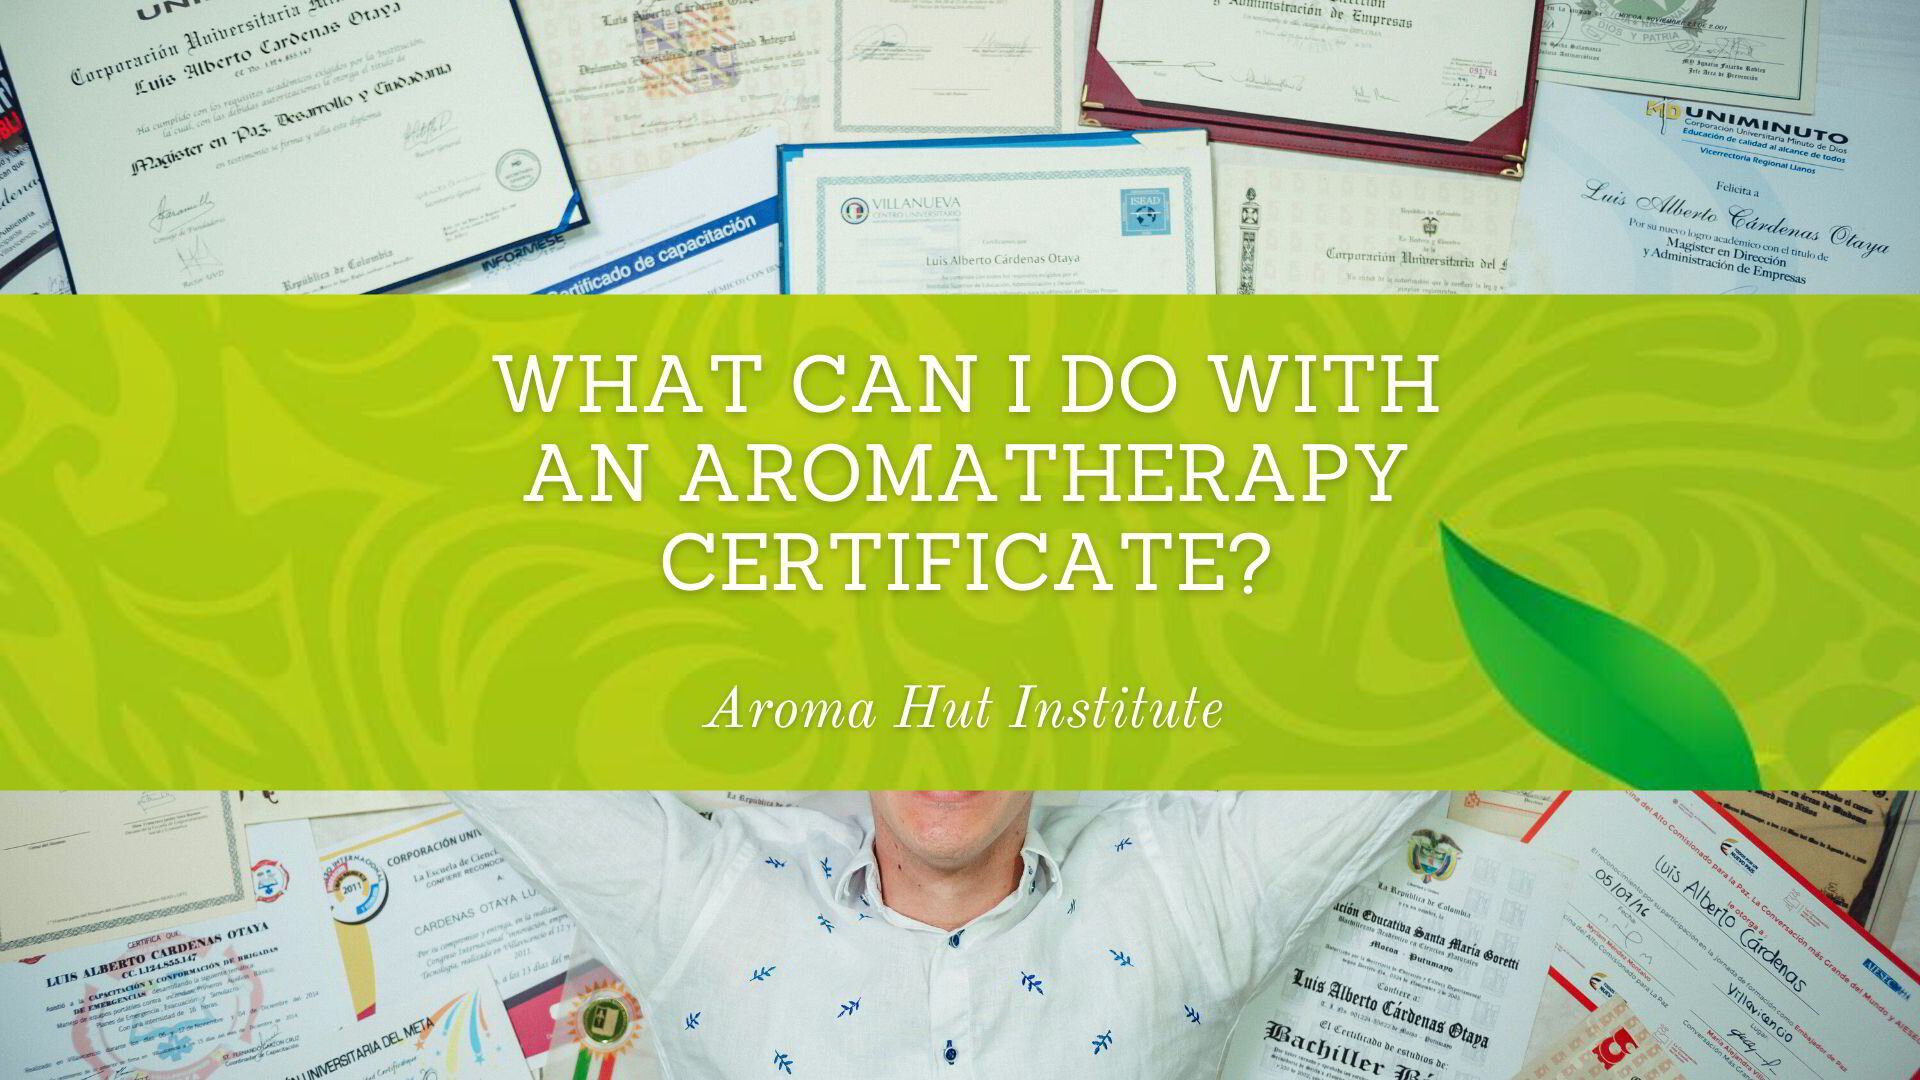 What Can I Do With an Aromatherapy Certificate?